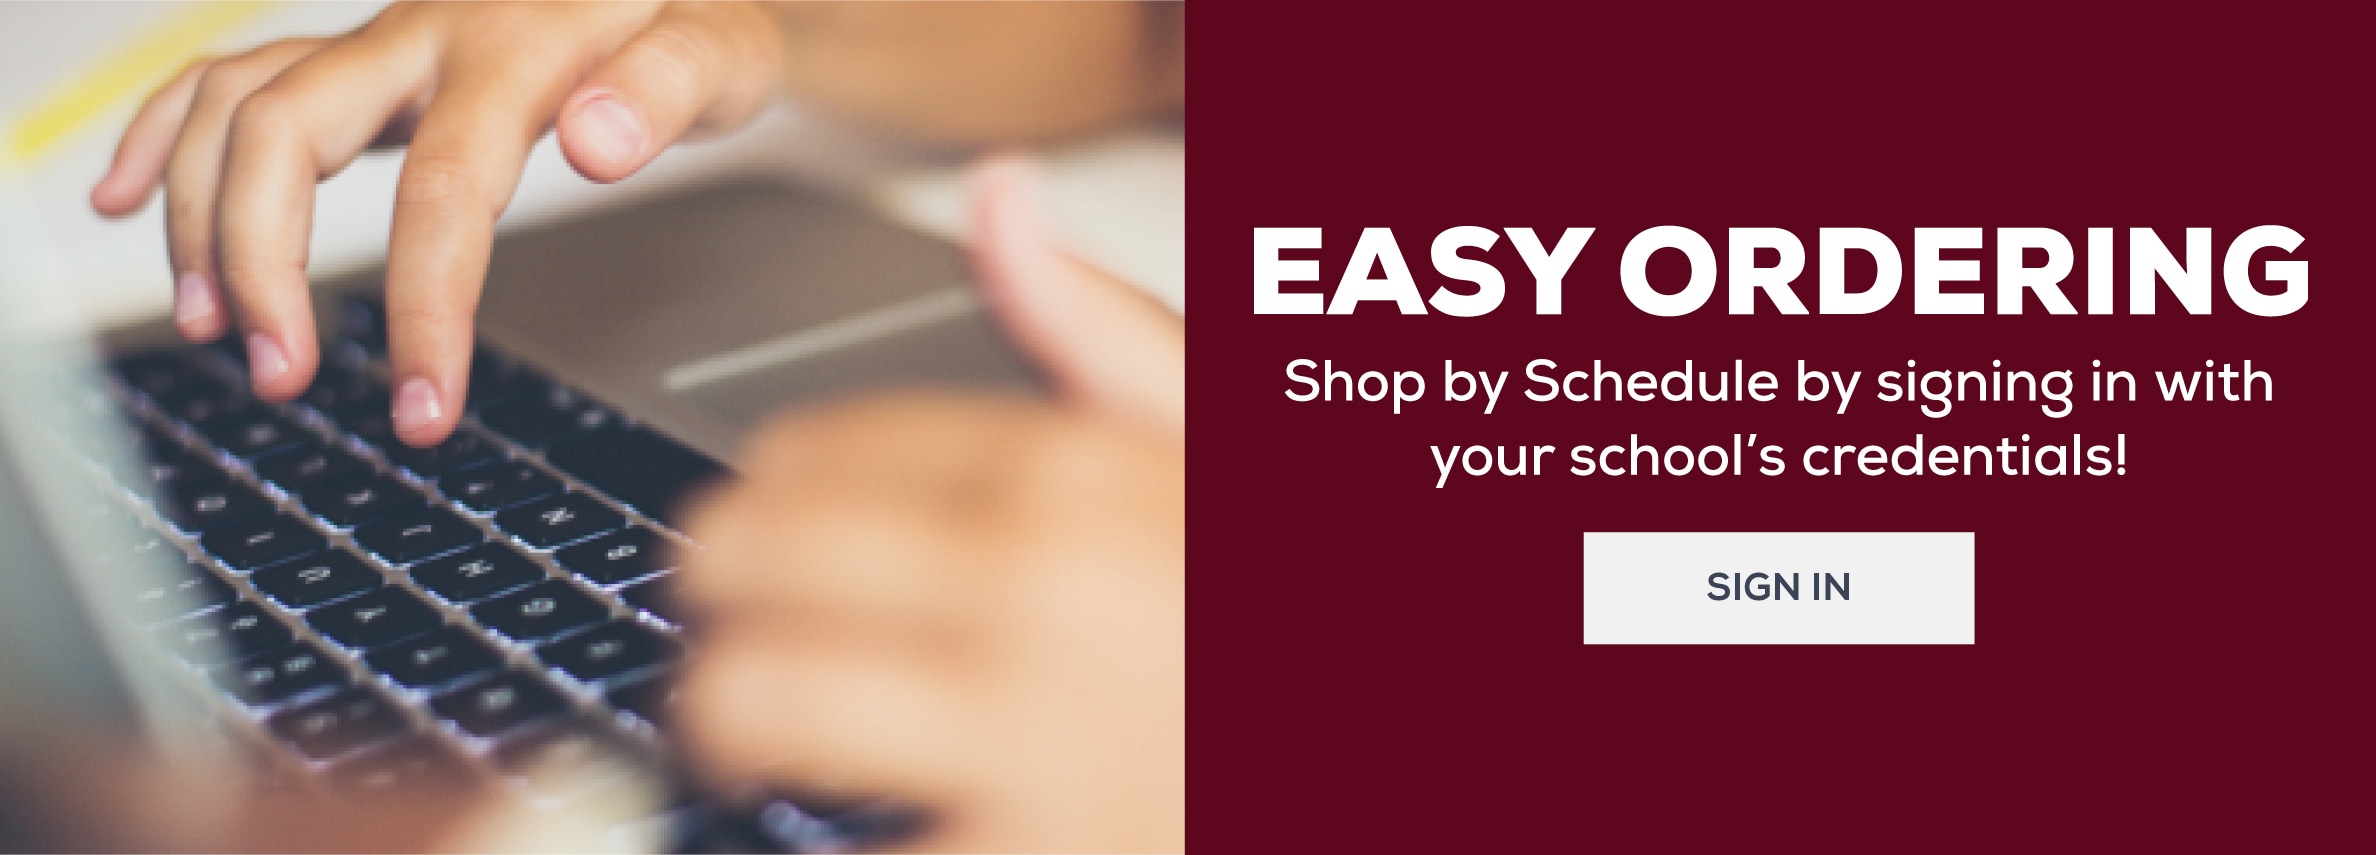 Easy Ordering. Shop by schedule by signing in with your school's credentials. Learn more.